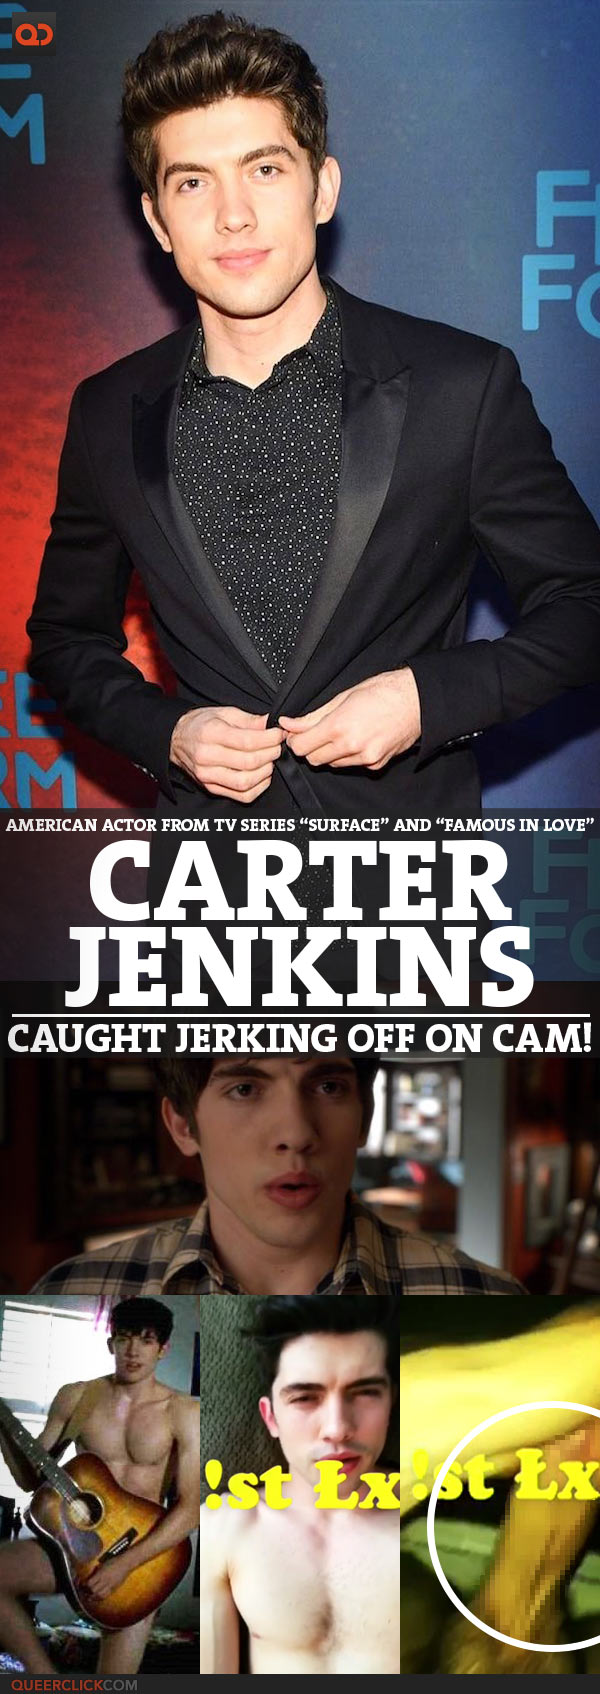 Carter Jenkins, American Actor From TV Series “Surface” And “Famous In Love”, Caught Jerking Off On Cam!